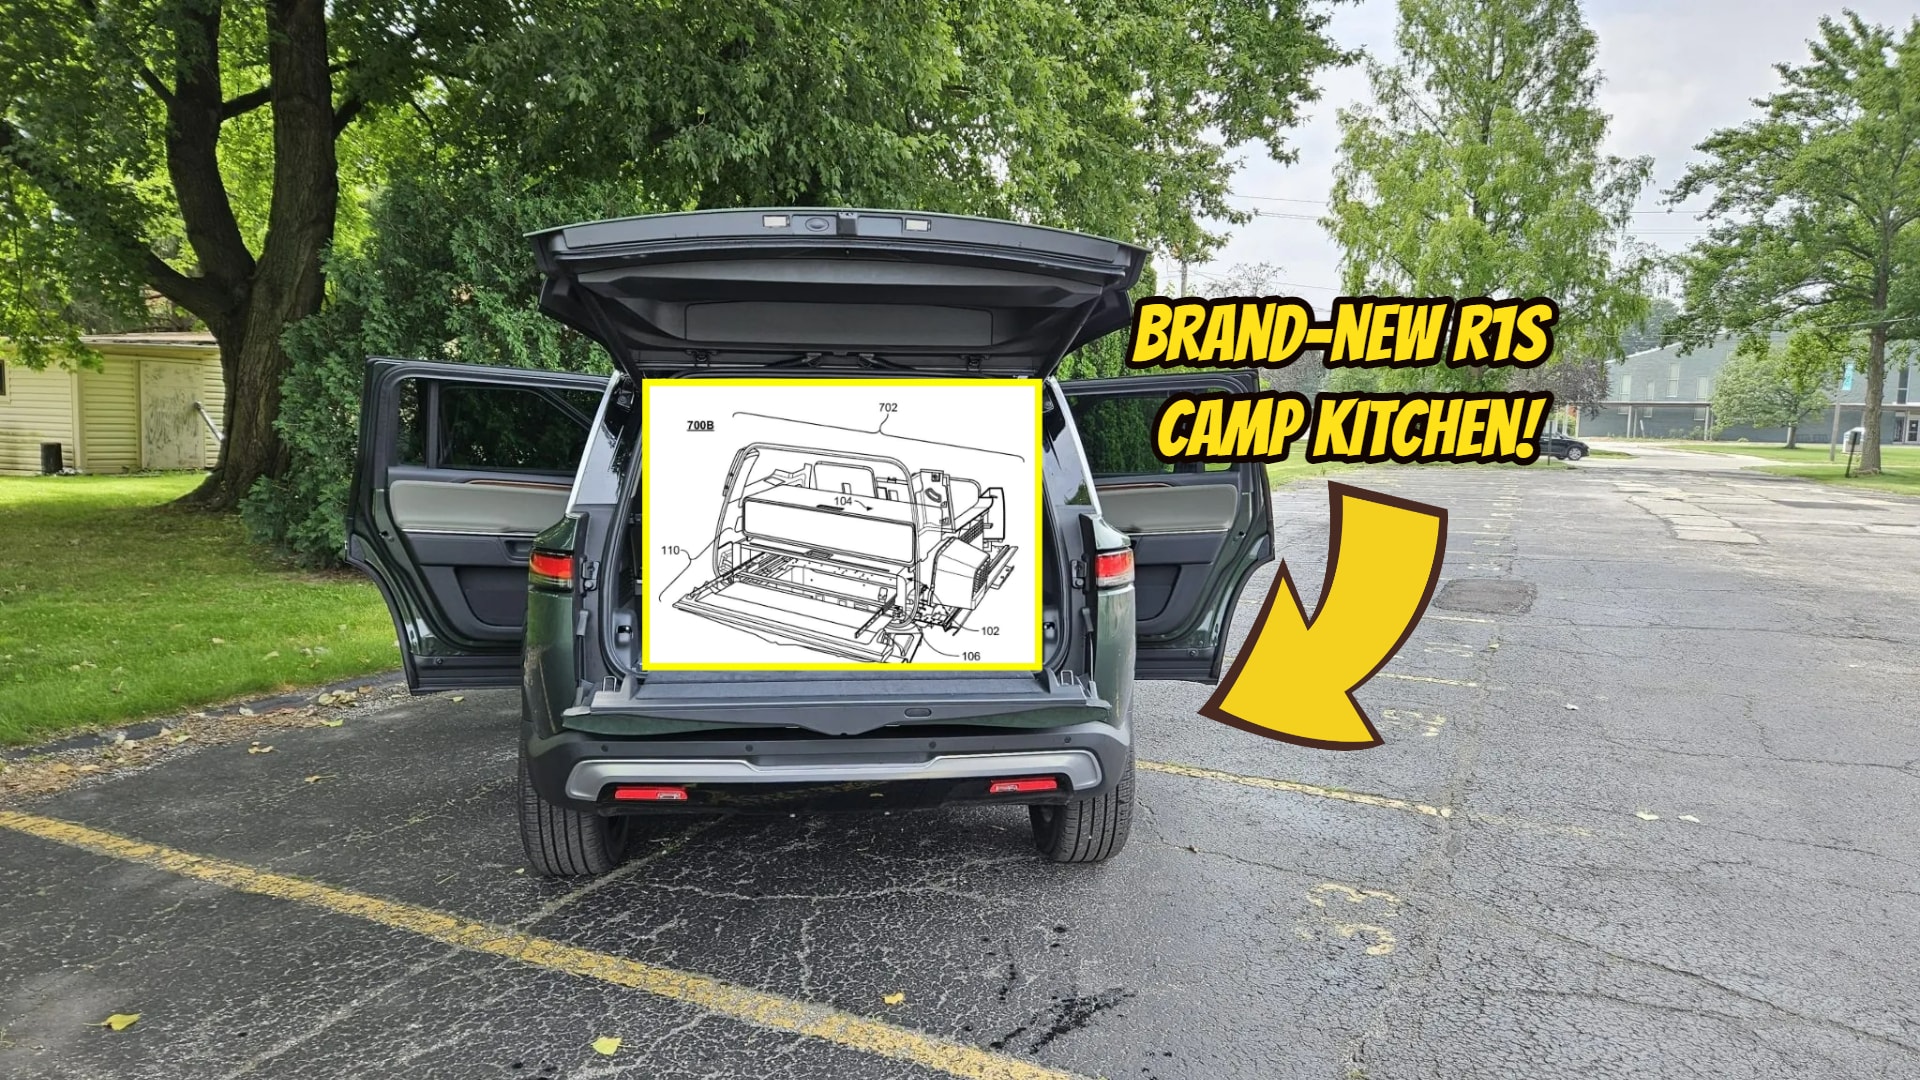 Rivian R1s Camp Kitchen Trademark Filed With The Uspto Might Not Seat Seven Anymore 219759 1 